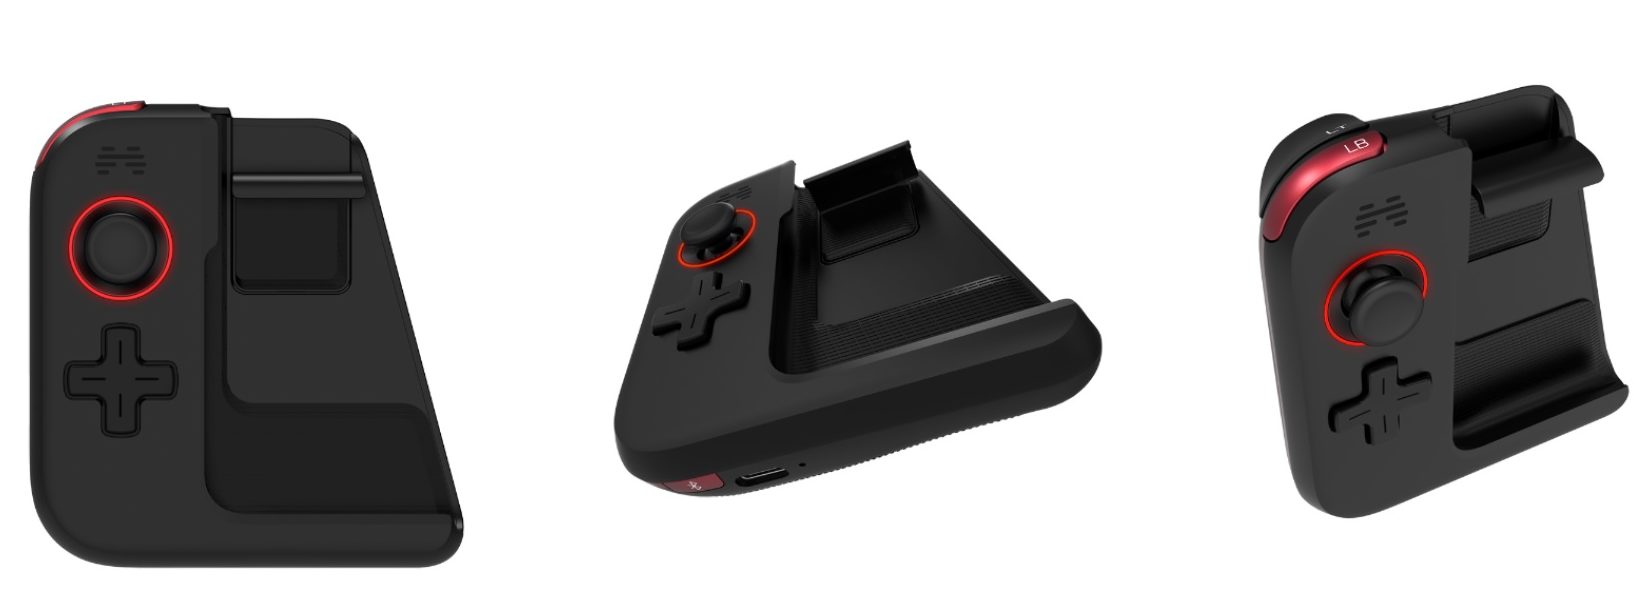 Menagerry Knikken Trechter webspin BETOP G1 Game Controller is a DFH accessory for the Huawei Mate 20 series,  now available on Giztop - Gizmochina